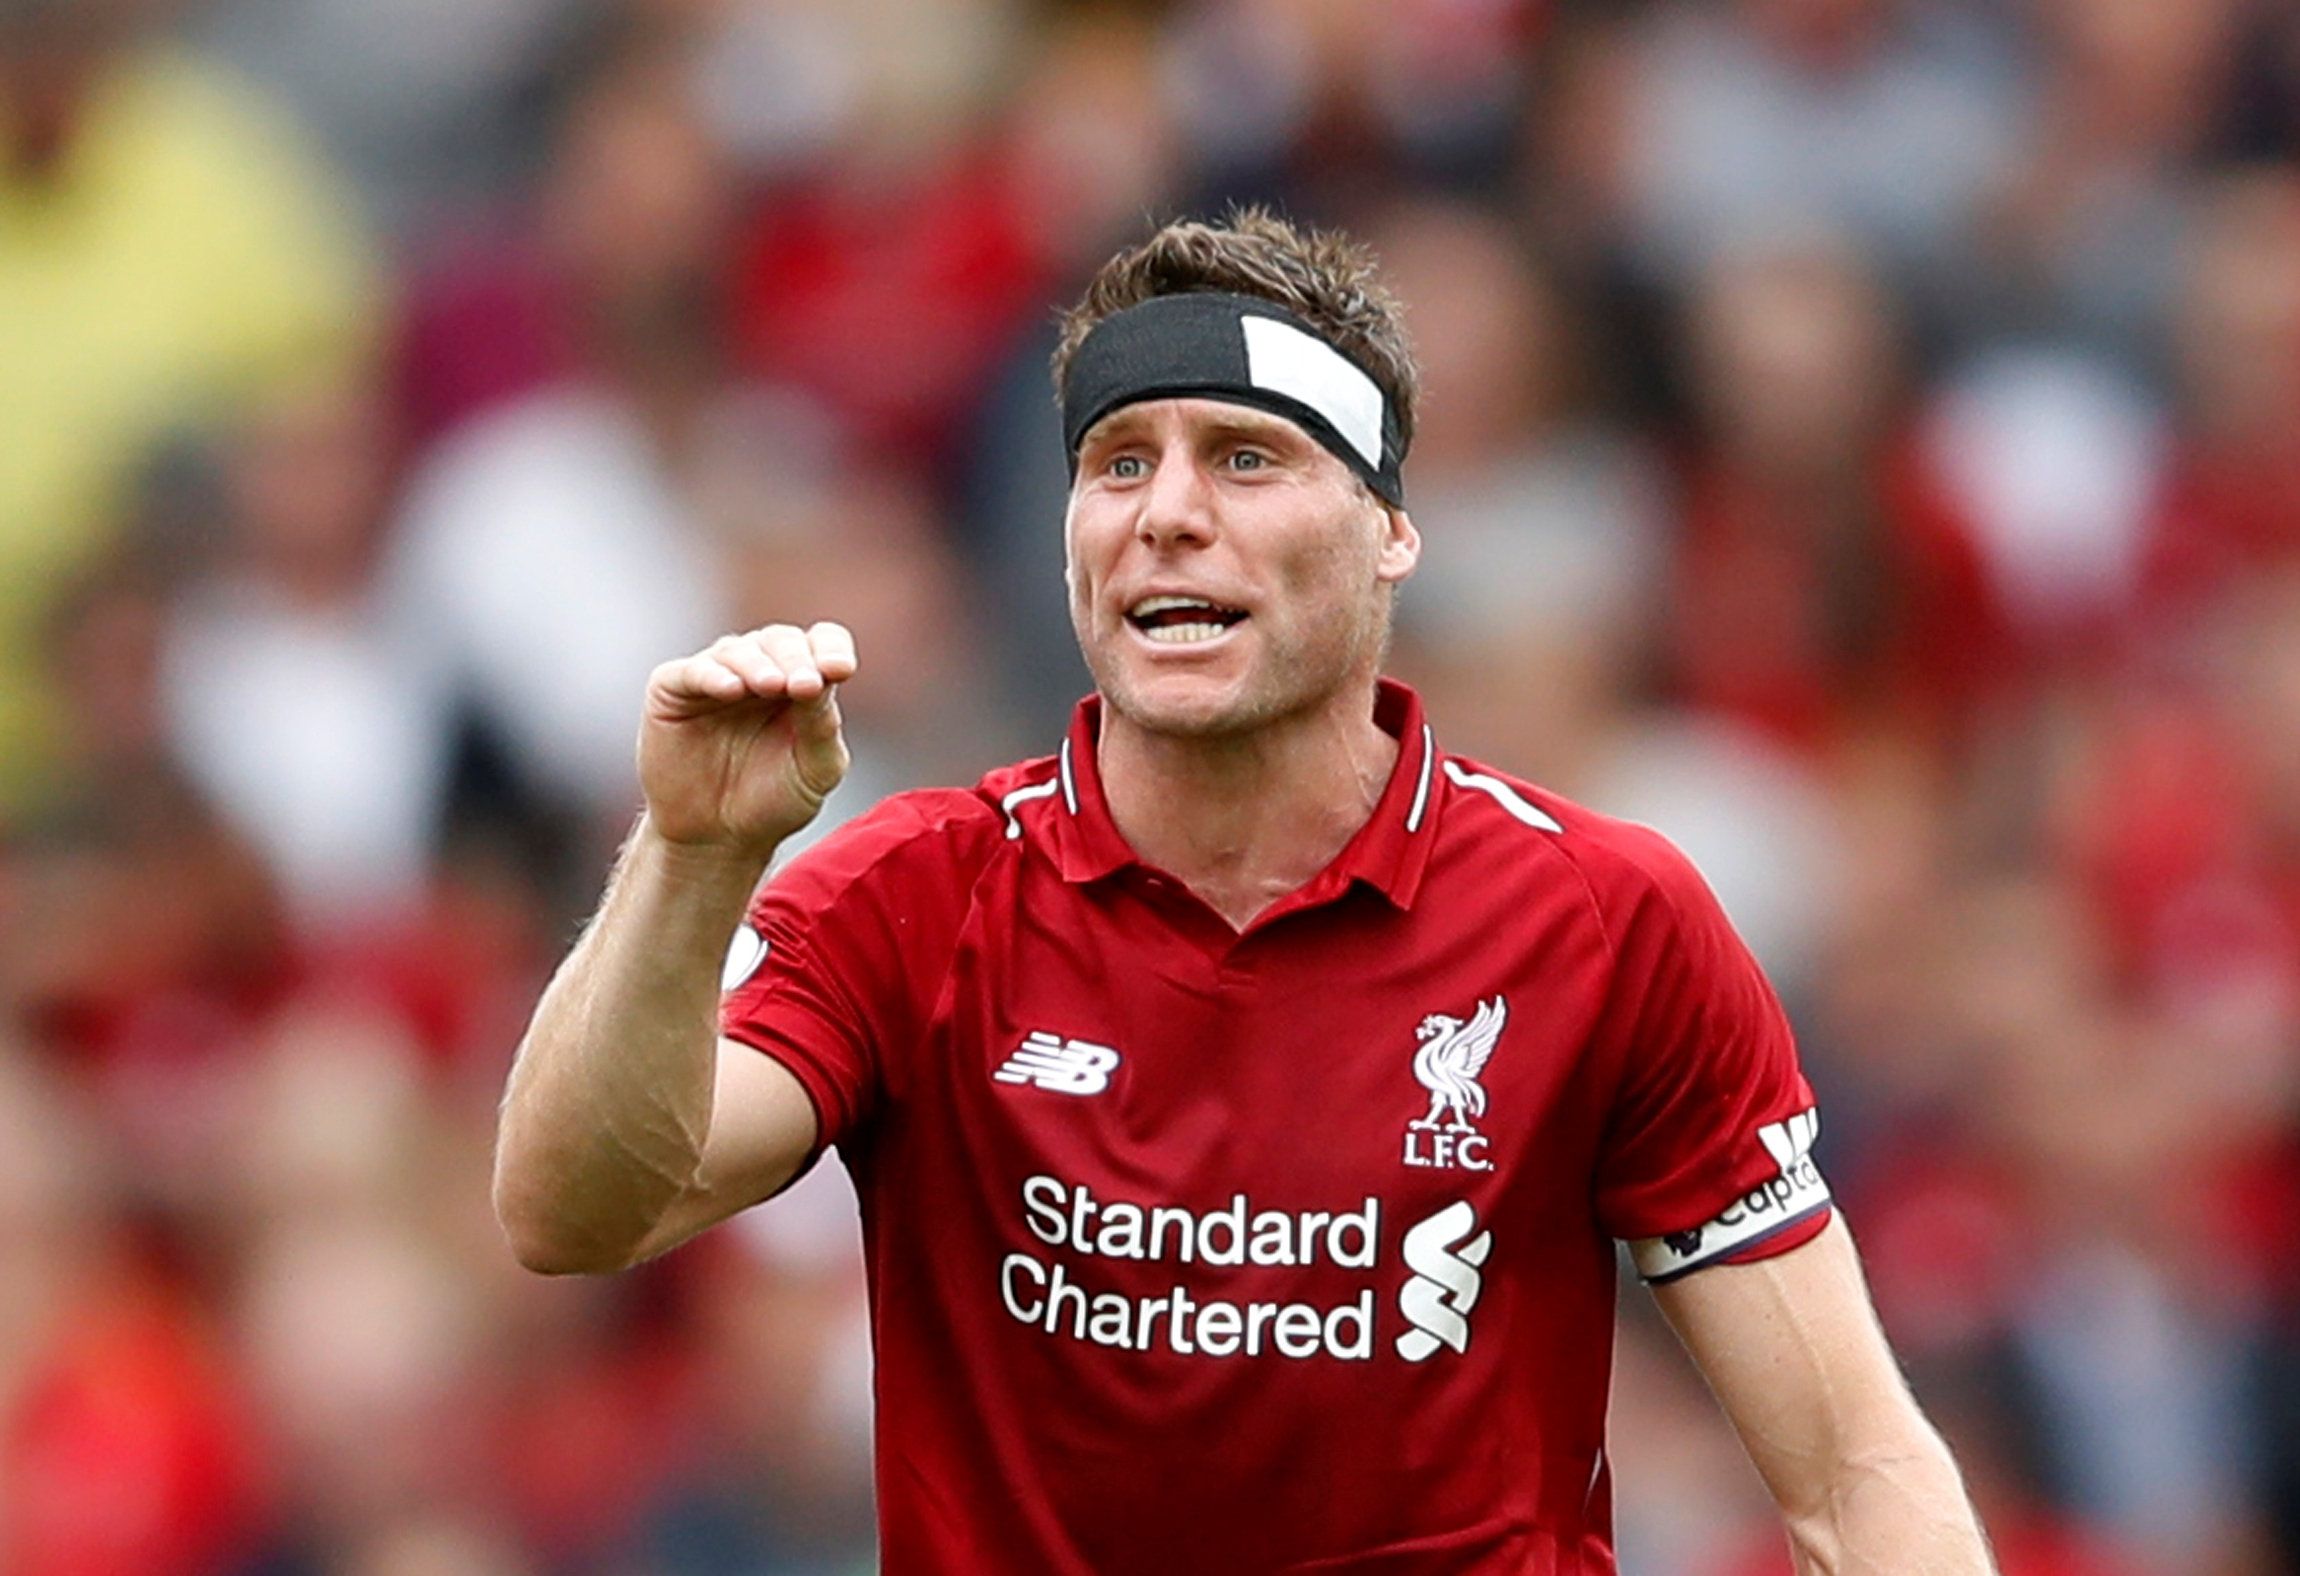 Soccer Football - Premier League - Liverpool v West Ham United - Anfield, Liverpool, Britain - August 12, 2018   Liverpool's James Milner gestures during the match    Action Images via Reuters/Carl Recine    EDITORIAL USE ONLY. No use with unauthorized audio, video, data, fixture lists, club/league logos or "live" services. Online in-match use limited to 75 images, no video emulation. No use in betting, games or single club/league/player publications.  Please contact your account representative 